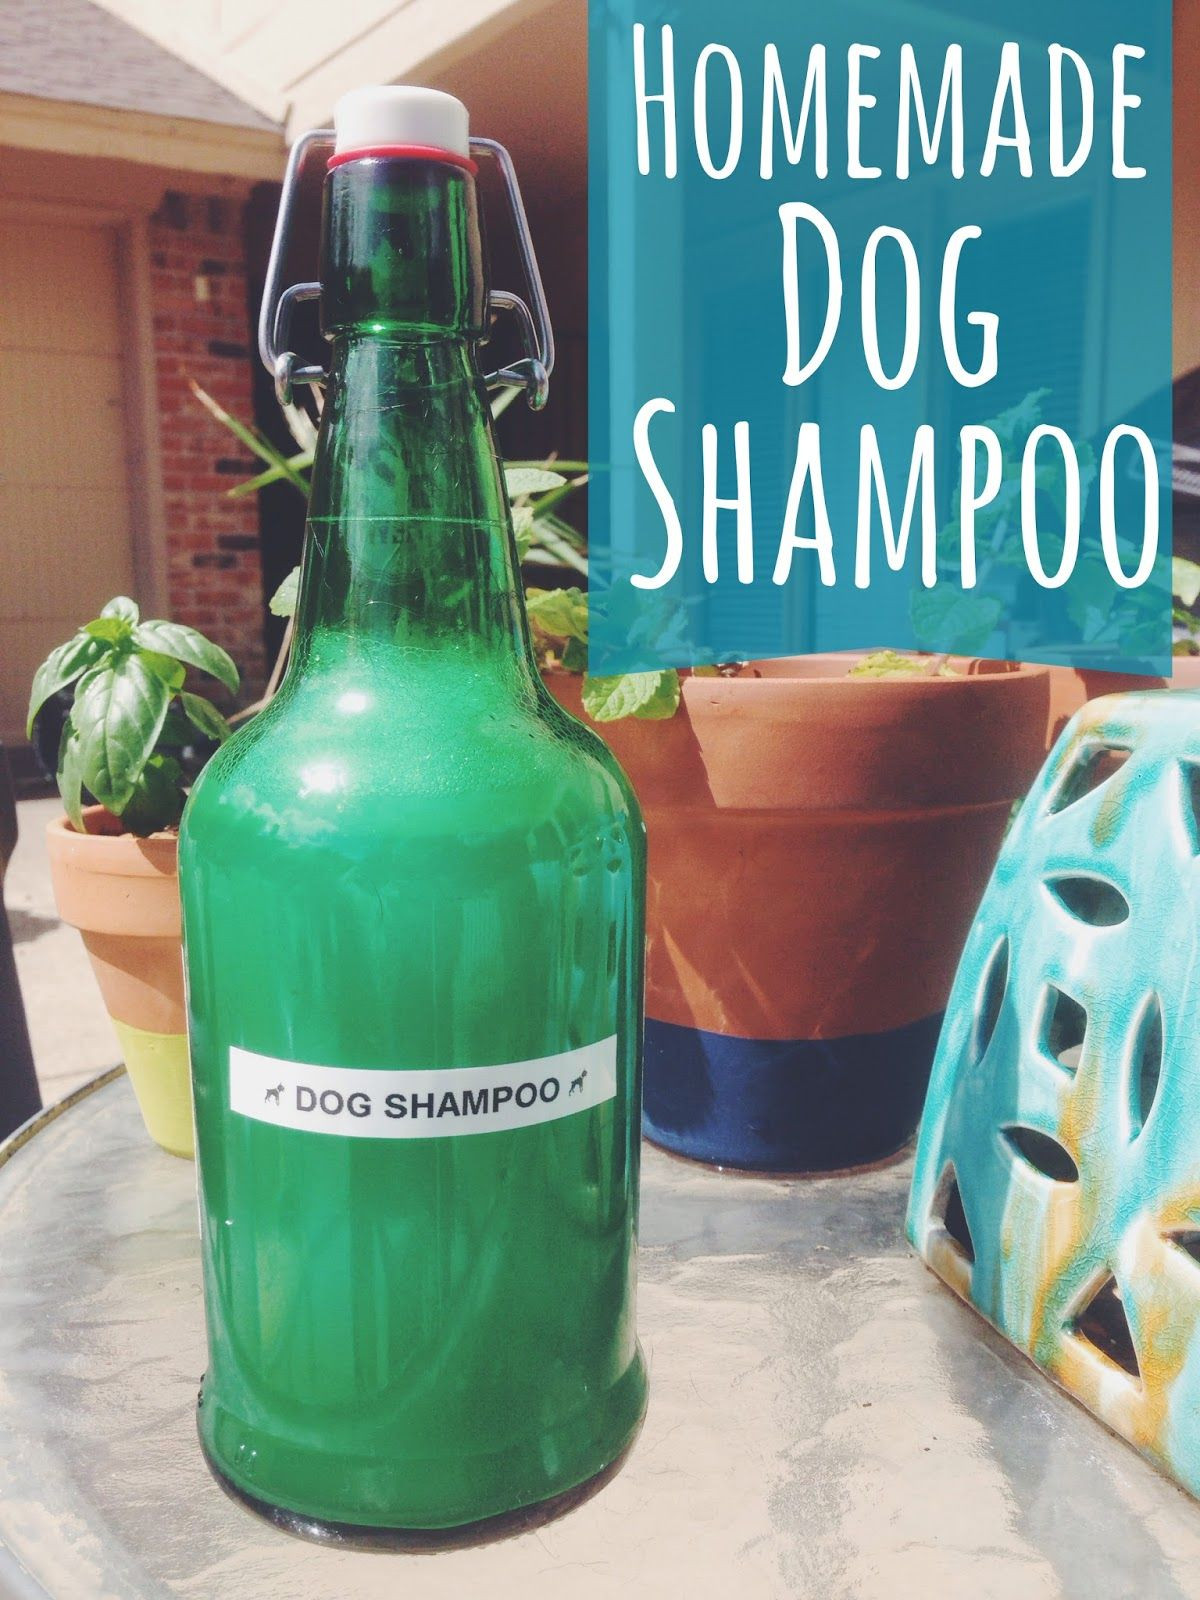 DIY Dog Shampoo With Coconut Oil
 Something refresihn we can make for our pup homemade dog